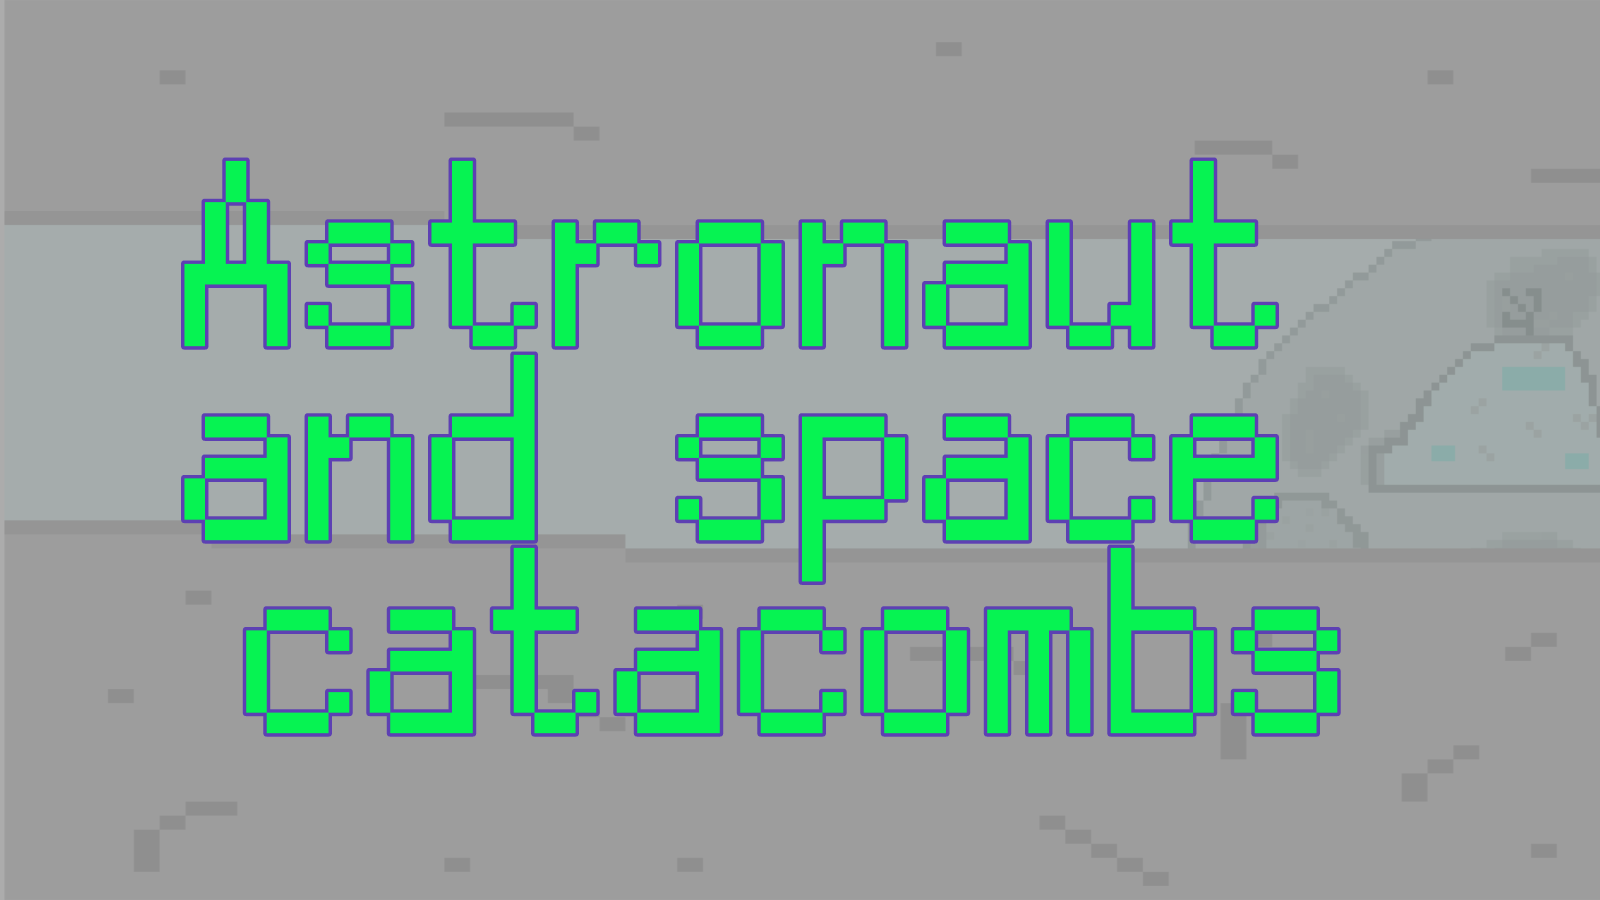 Astronaut and space catacombs